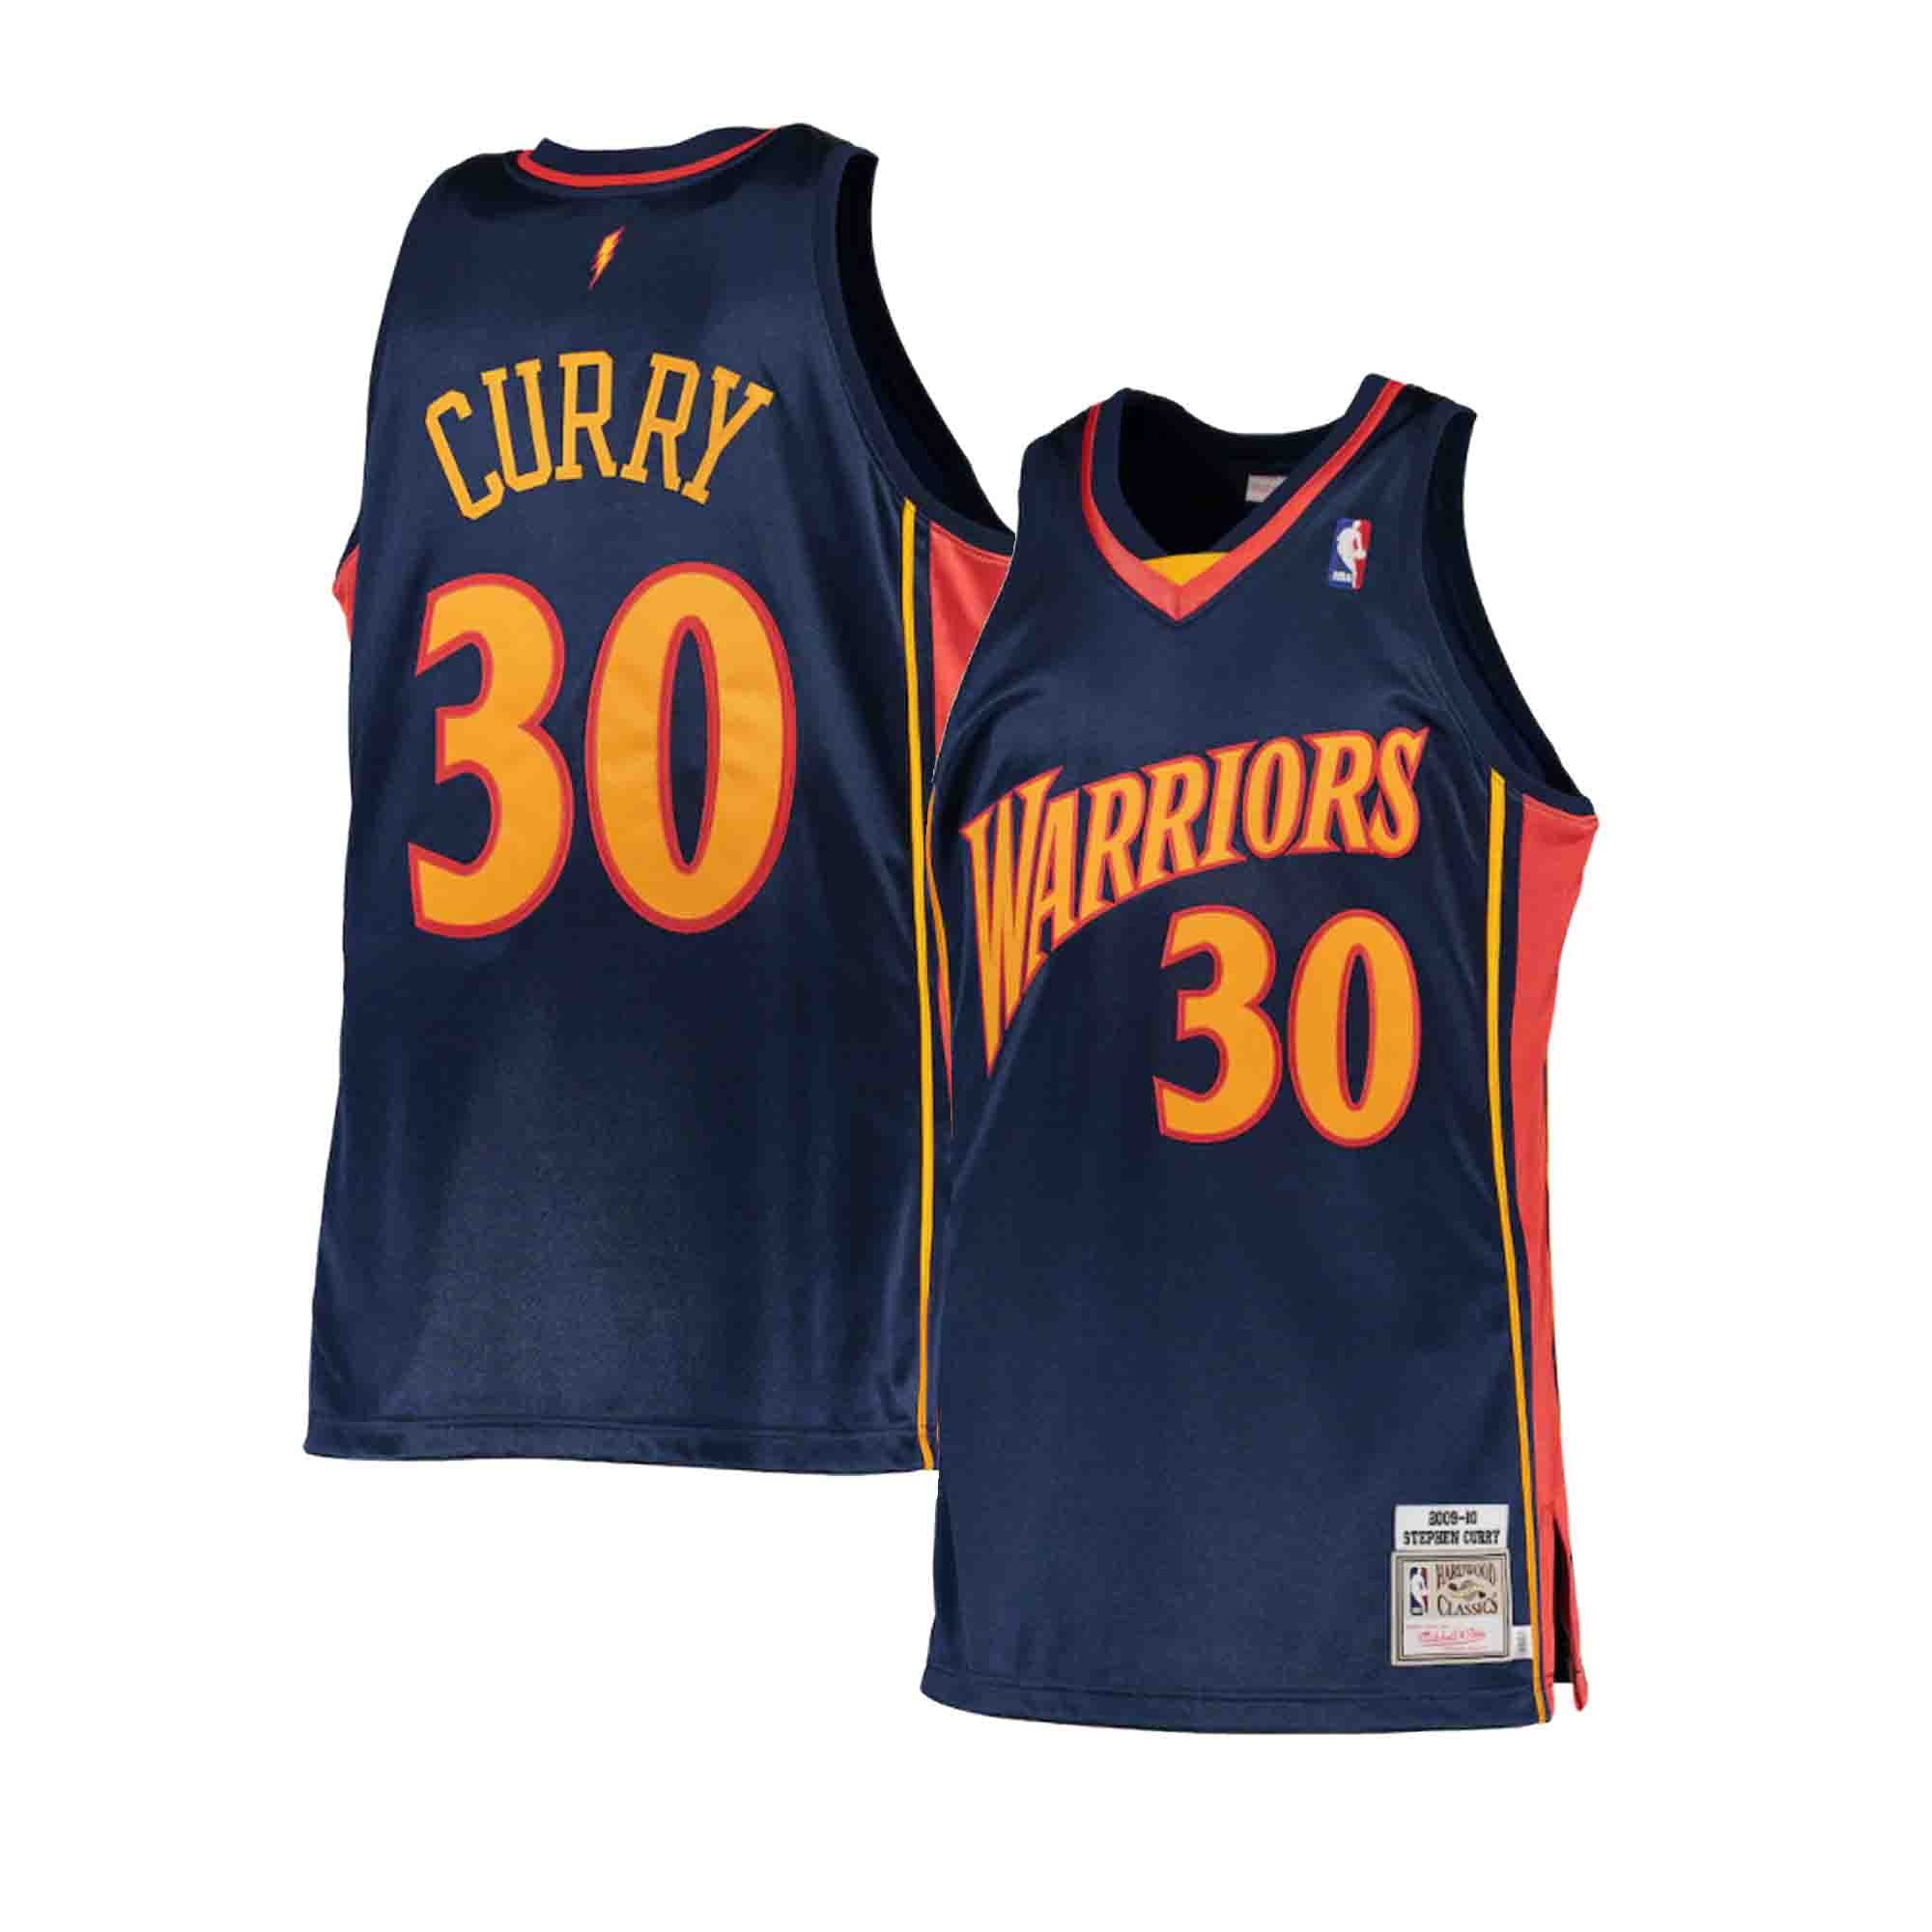 NBA Authentic Jersey 2009-10 Golden State Warriors Stephen Curry 